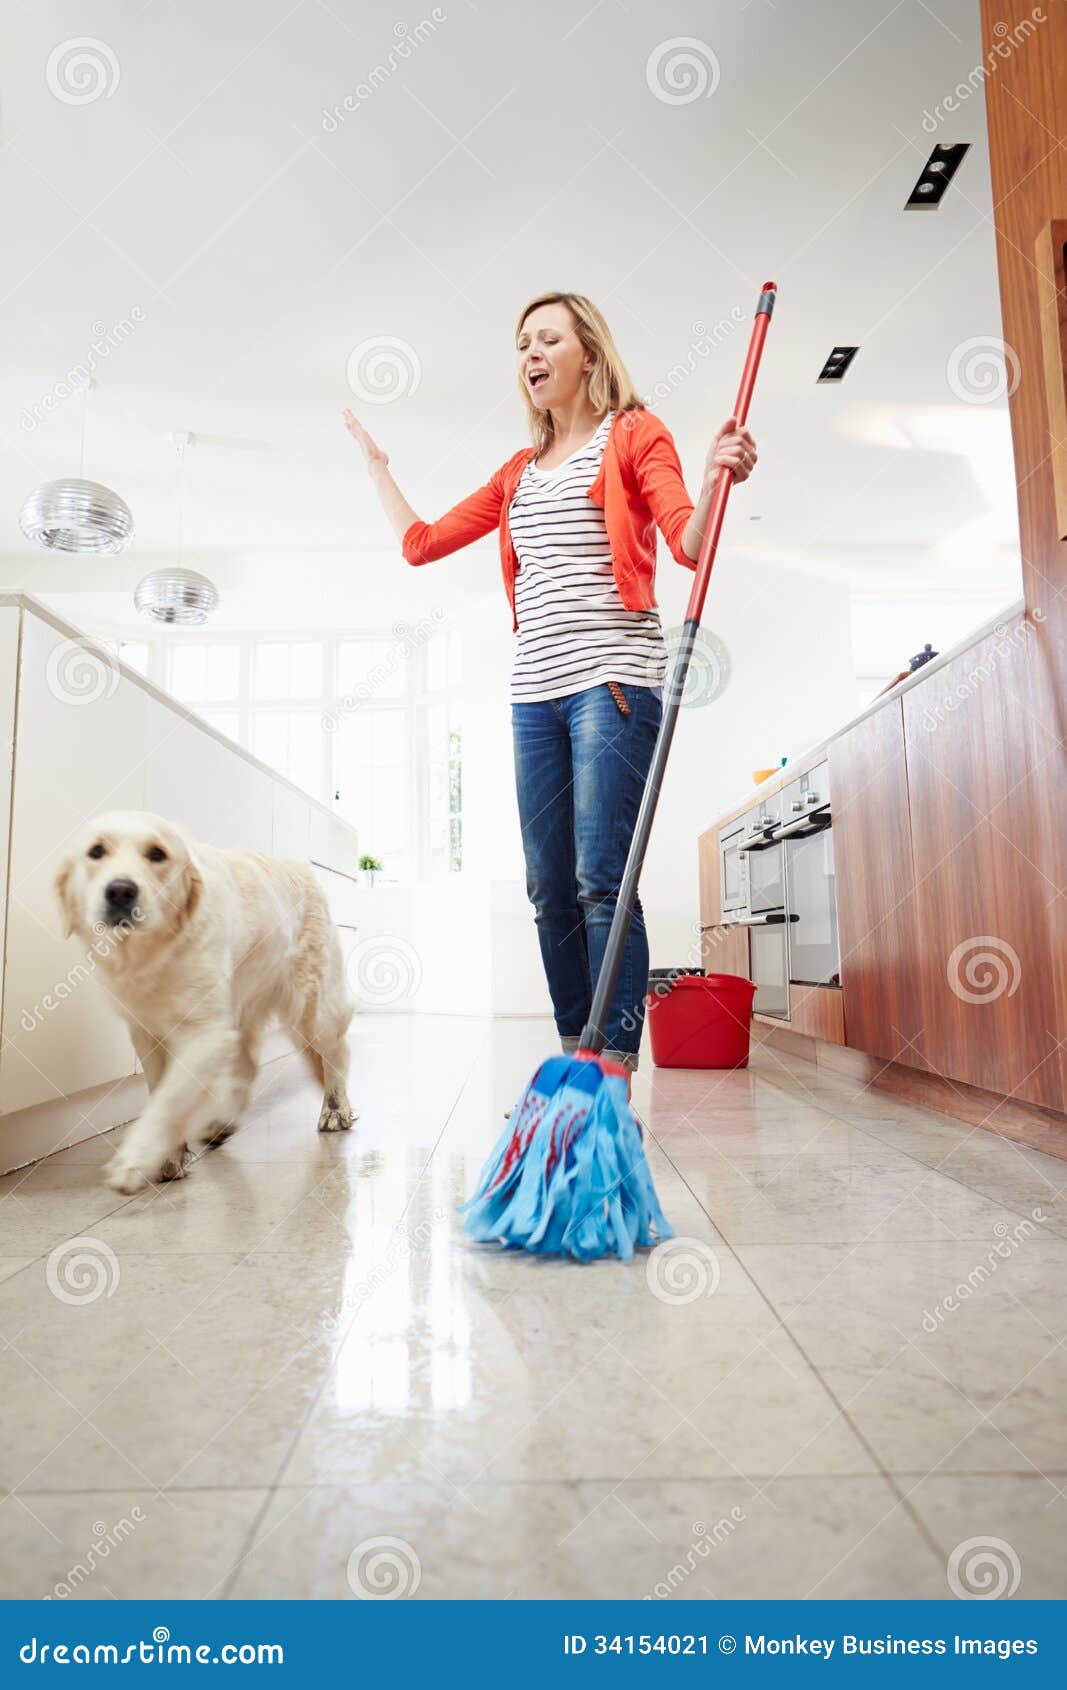 dog making mess of newly mopped floor